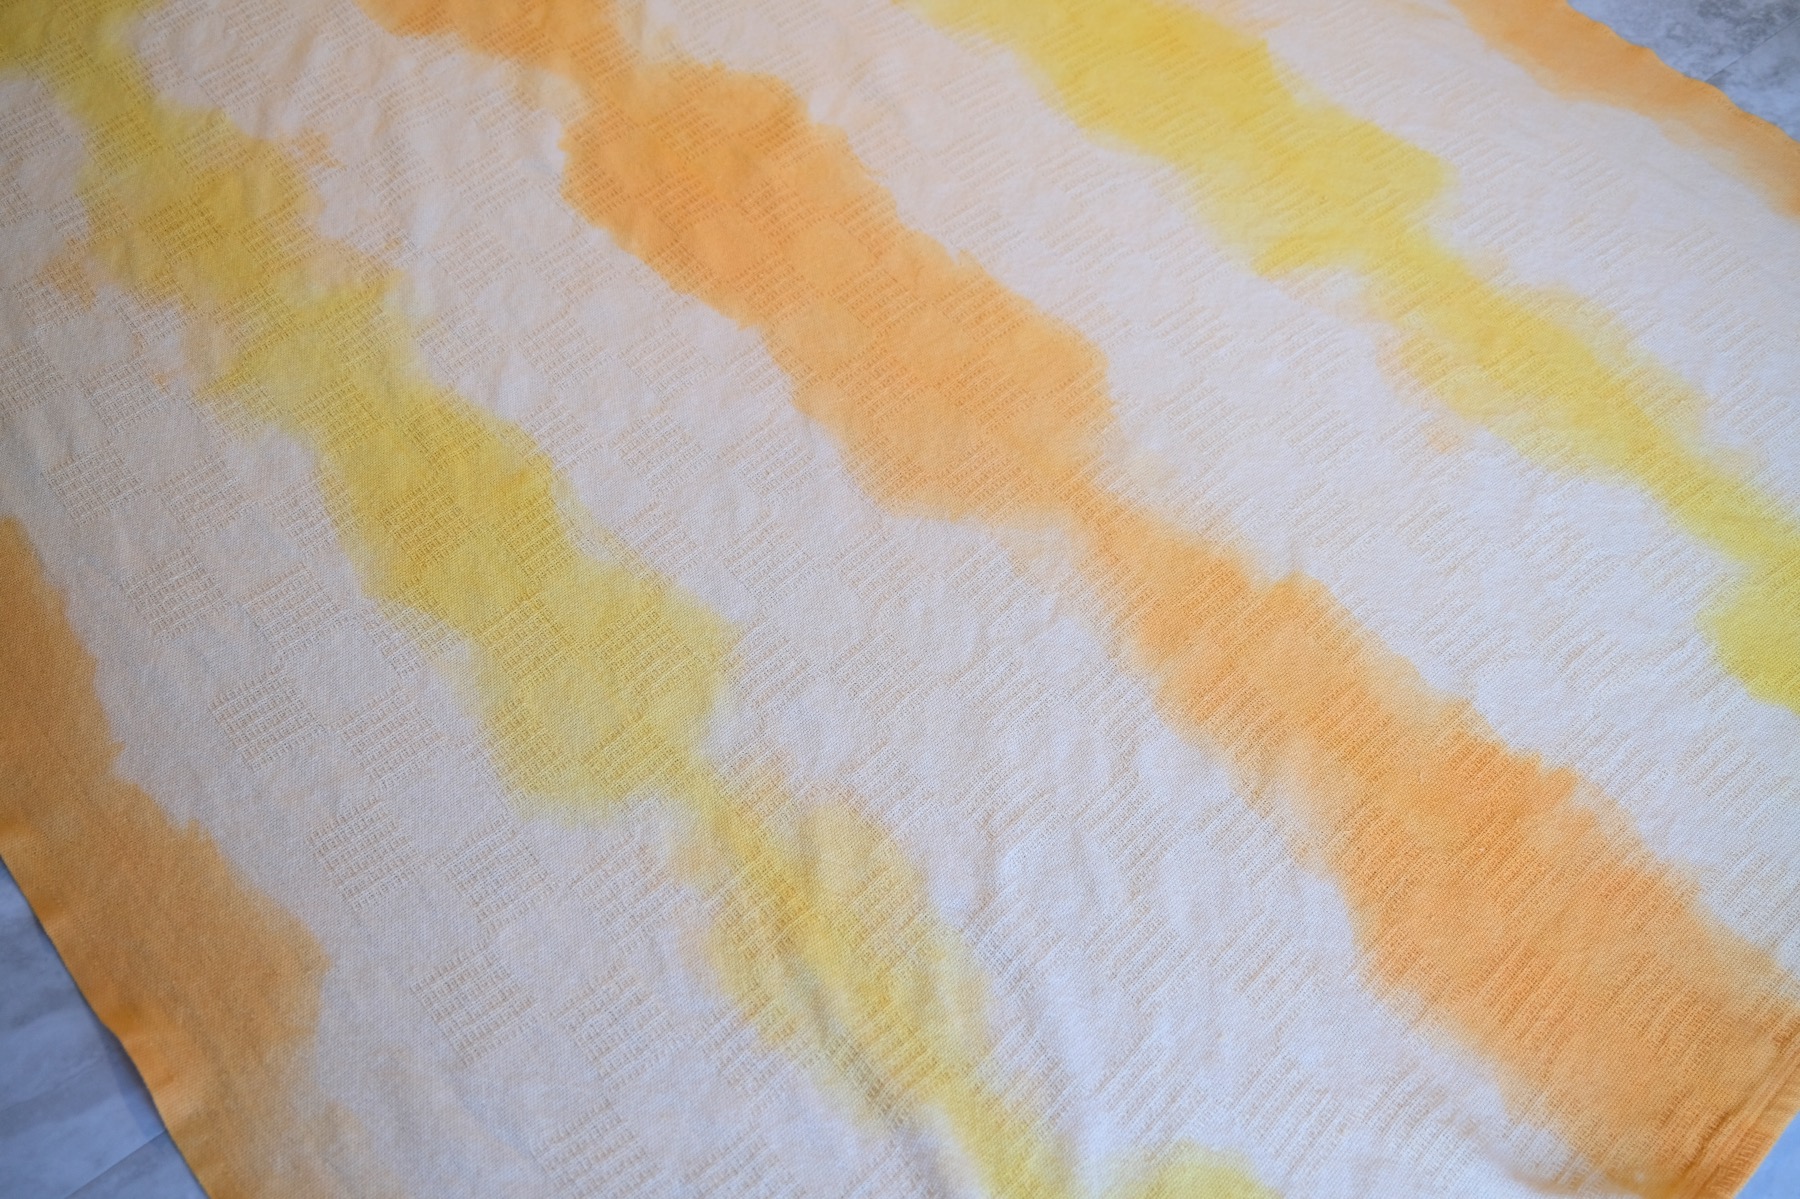 finished orange and yellow dip dyed blanket pop shop america